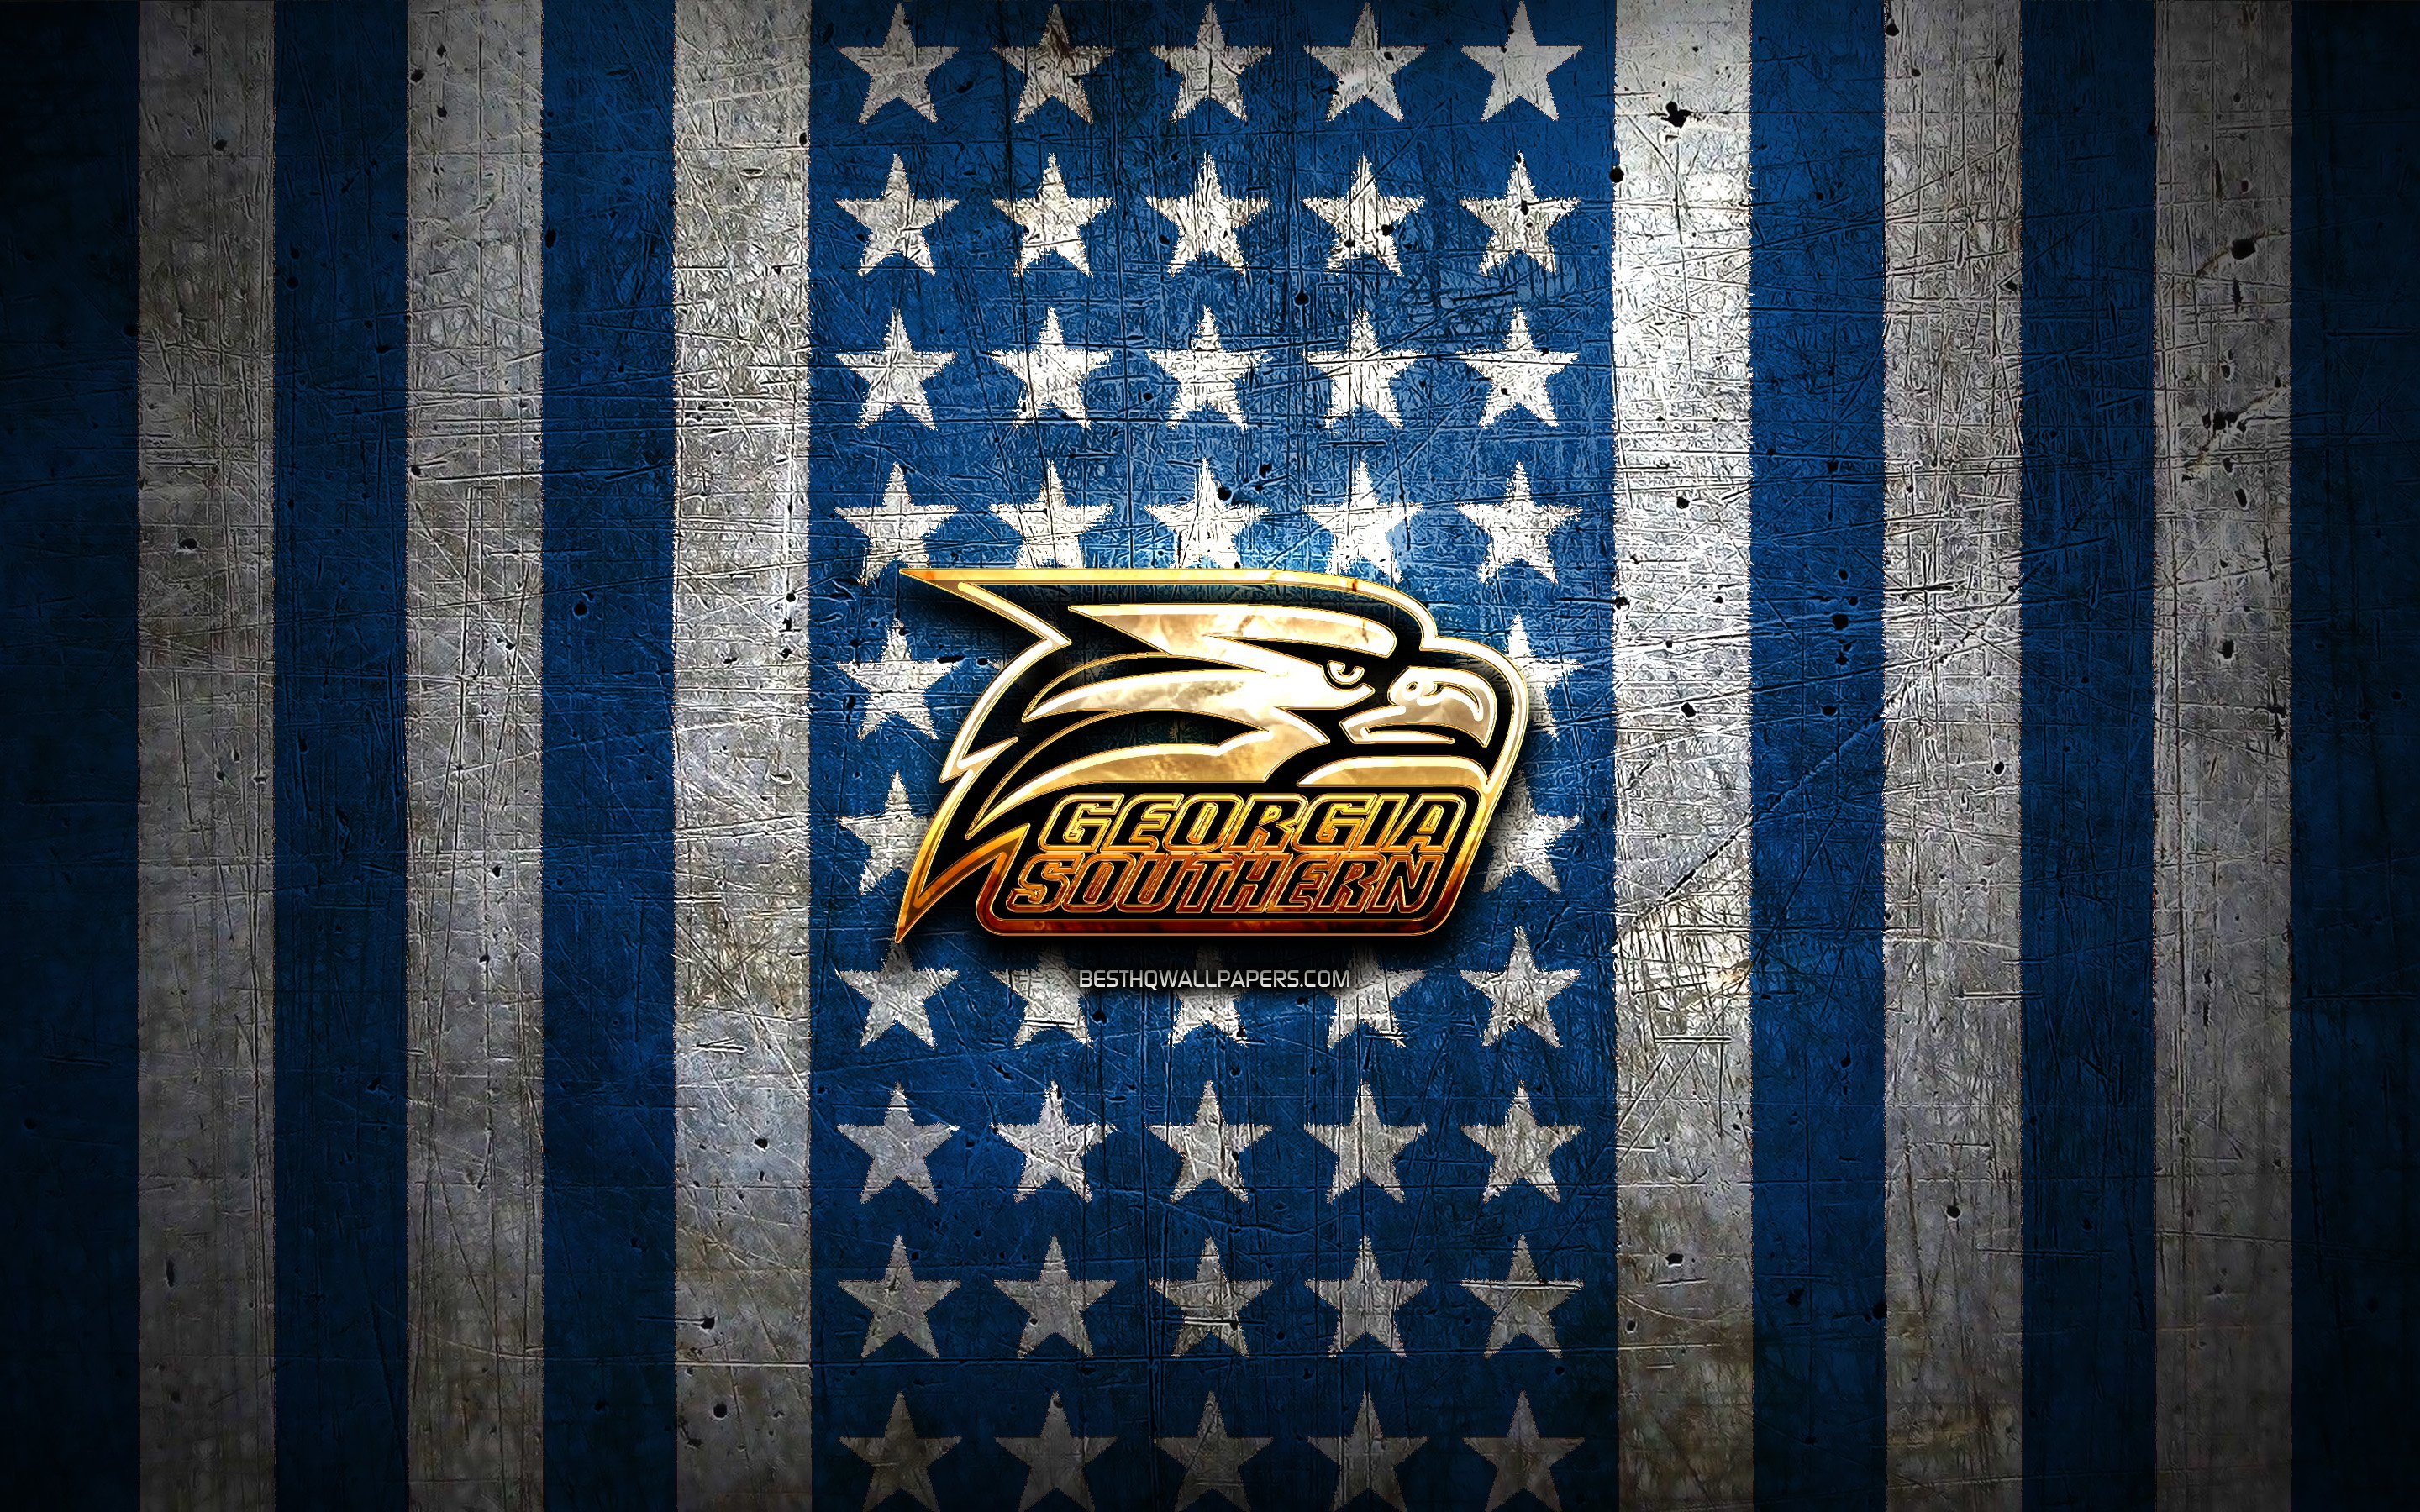 Download wallpaper Georgia Southern Eagles flag, NCAA, blue white metal background, american football team, Georgia Southern Eagles logo, USA, american football, golden logo, Georgia Southern Eagles for desktop with resolution 2880x1800. High